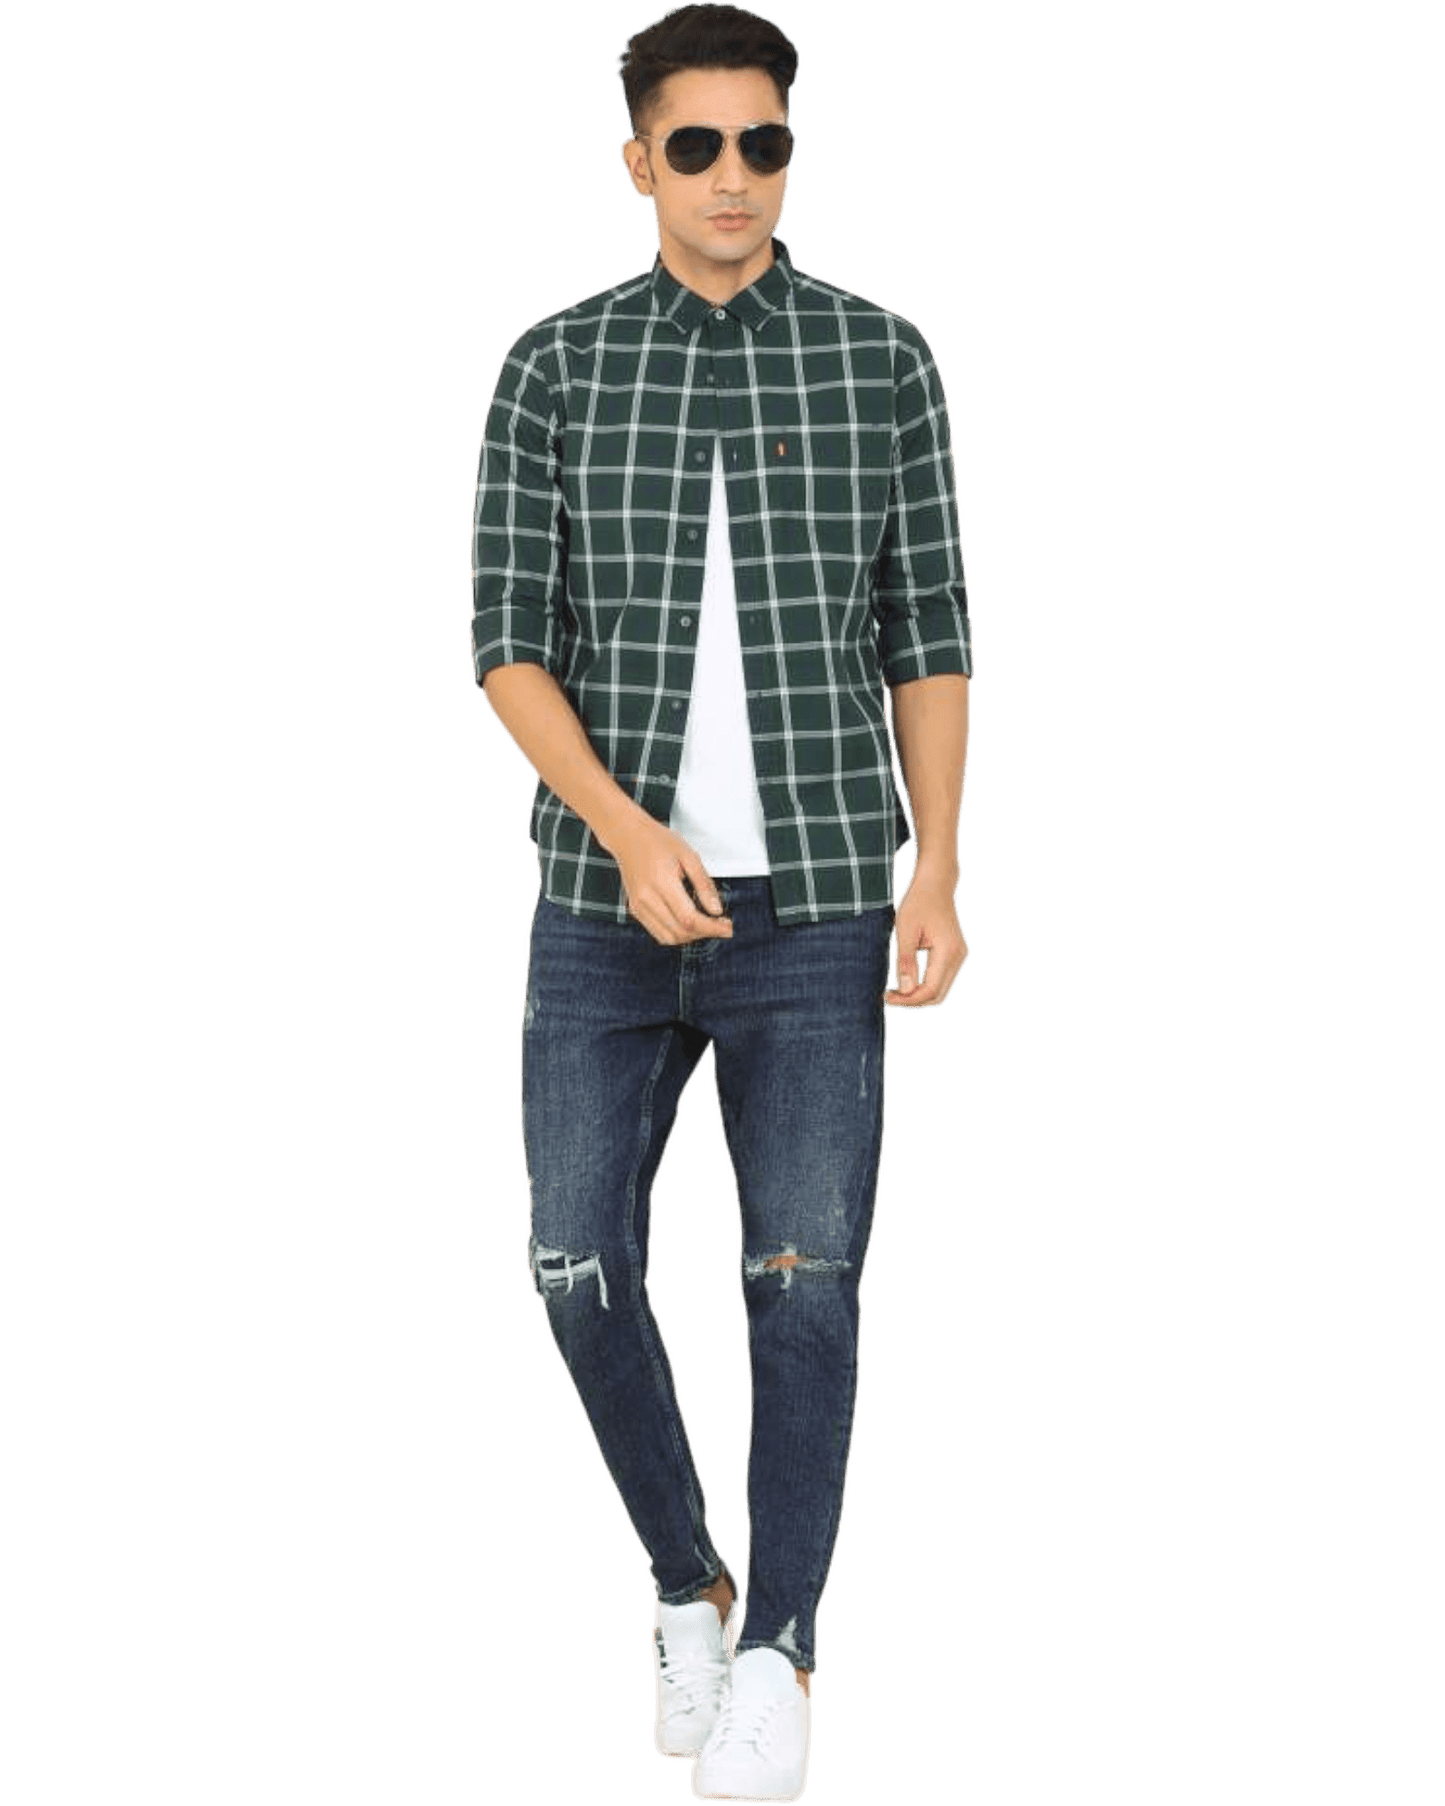 Men Slim Fit Checkered Spread Collar Casual Shirt - Apparel For Less